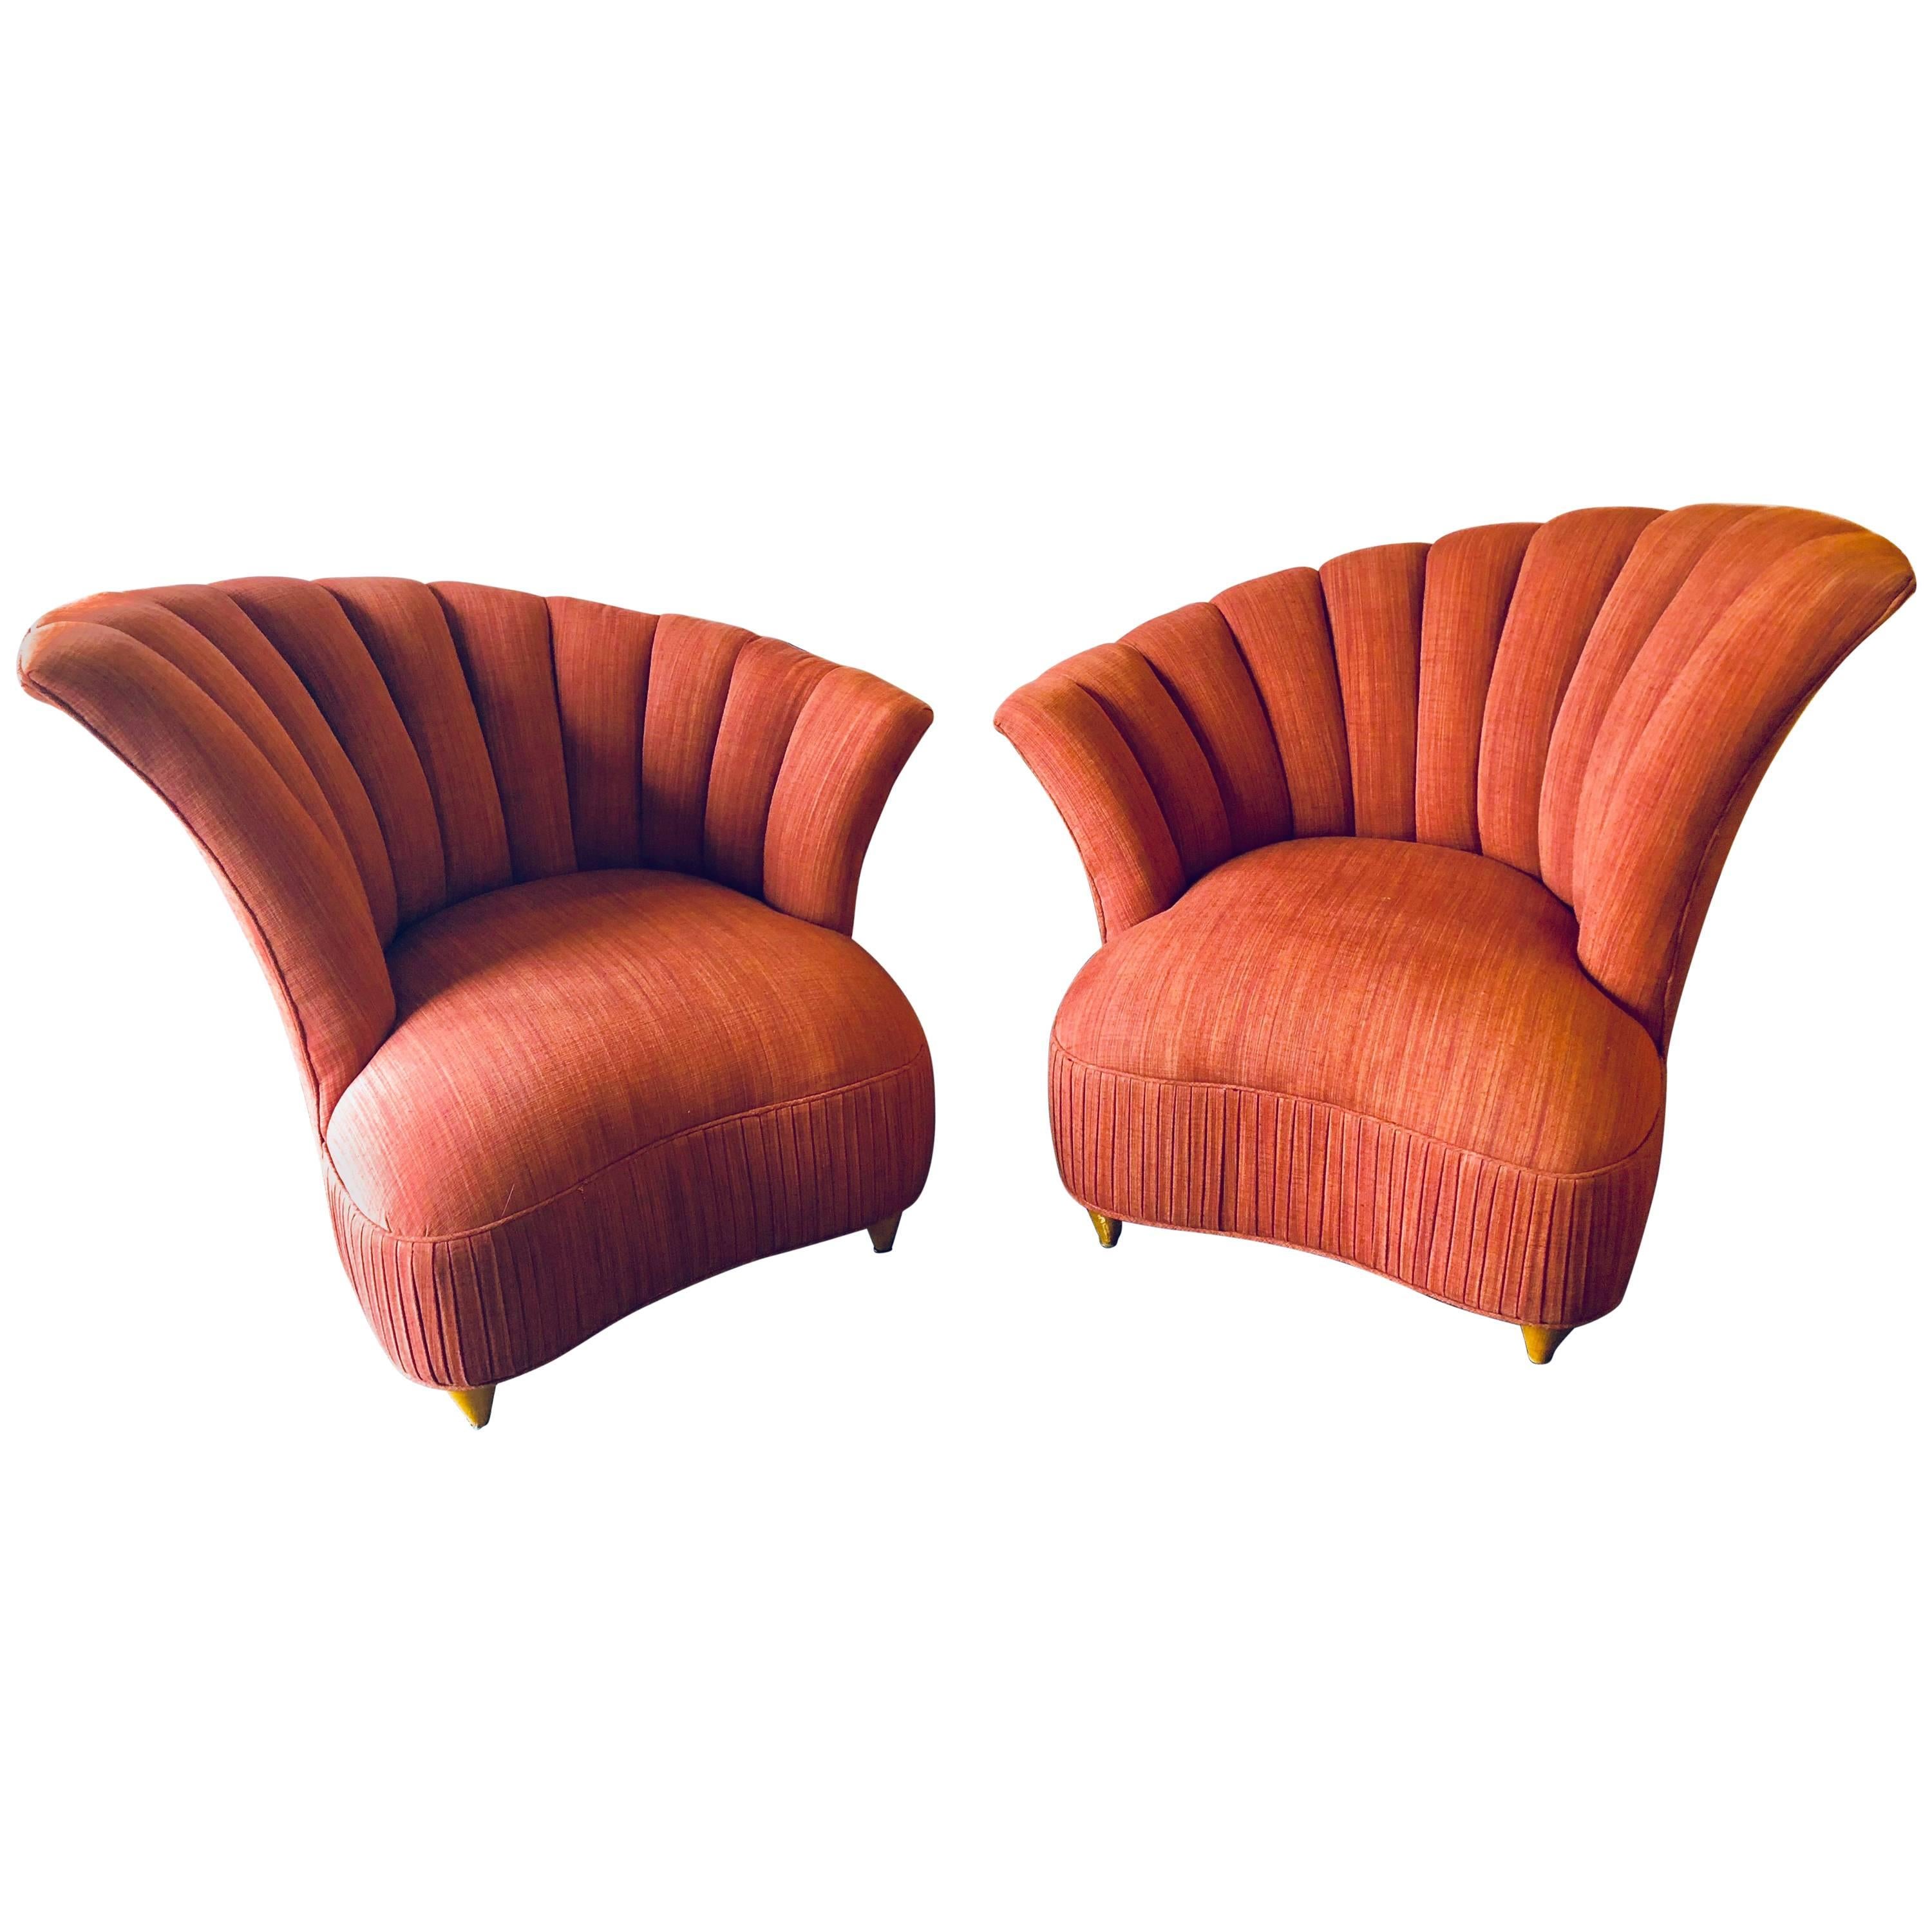 Pair of Modern Opposing Fin Back Armchairs